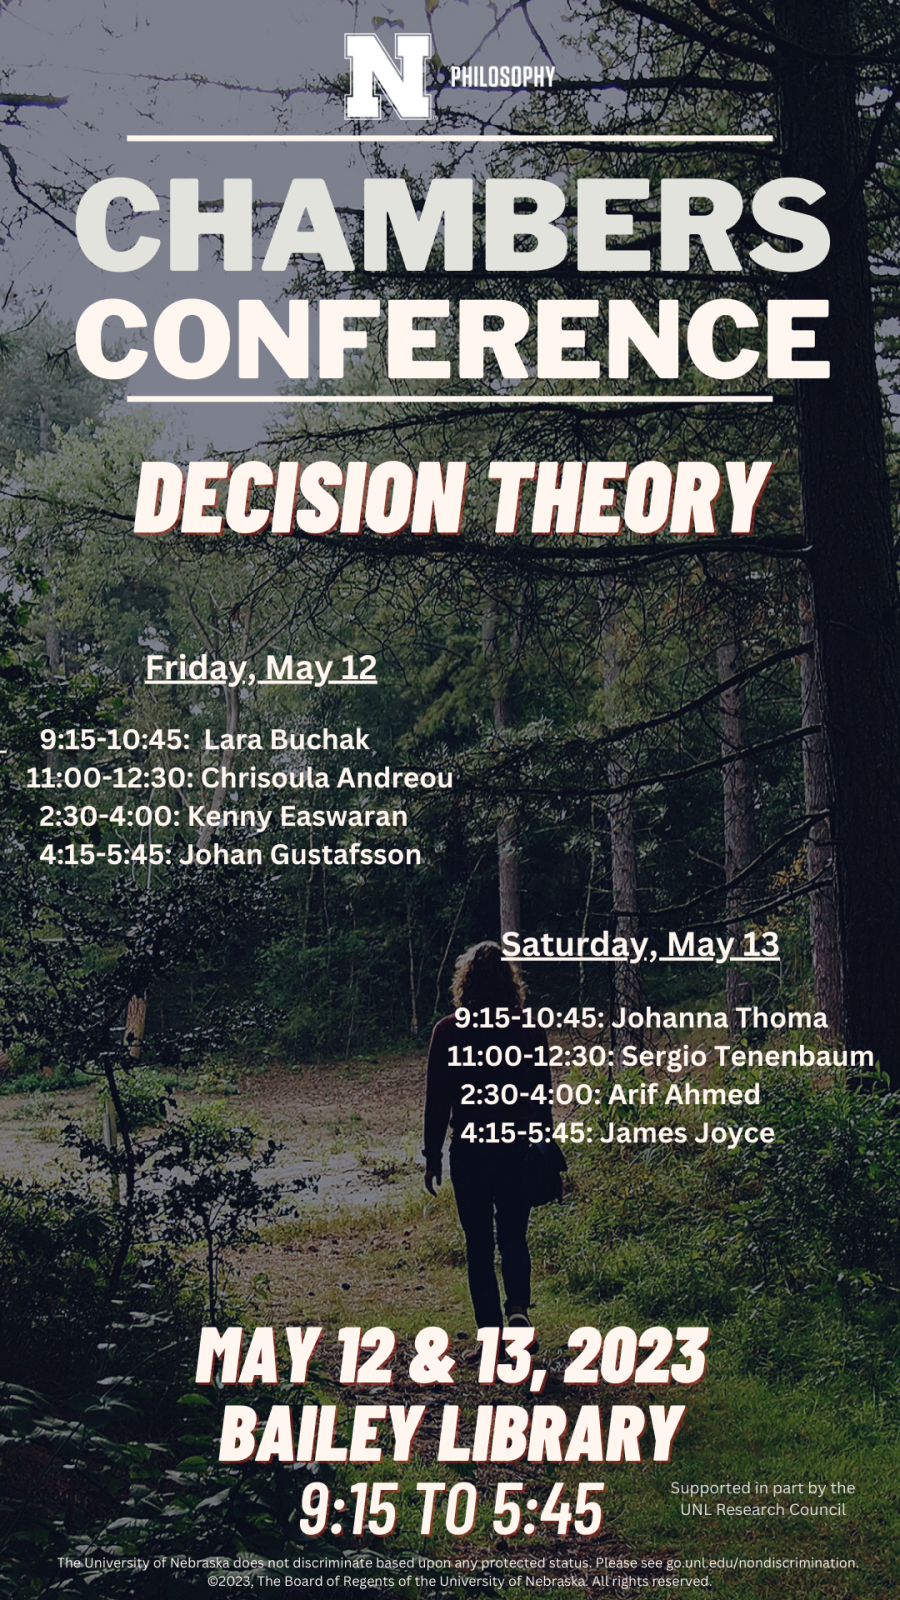 Chambers Conference on Decision Theory is May 12-13, 2023